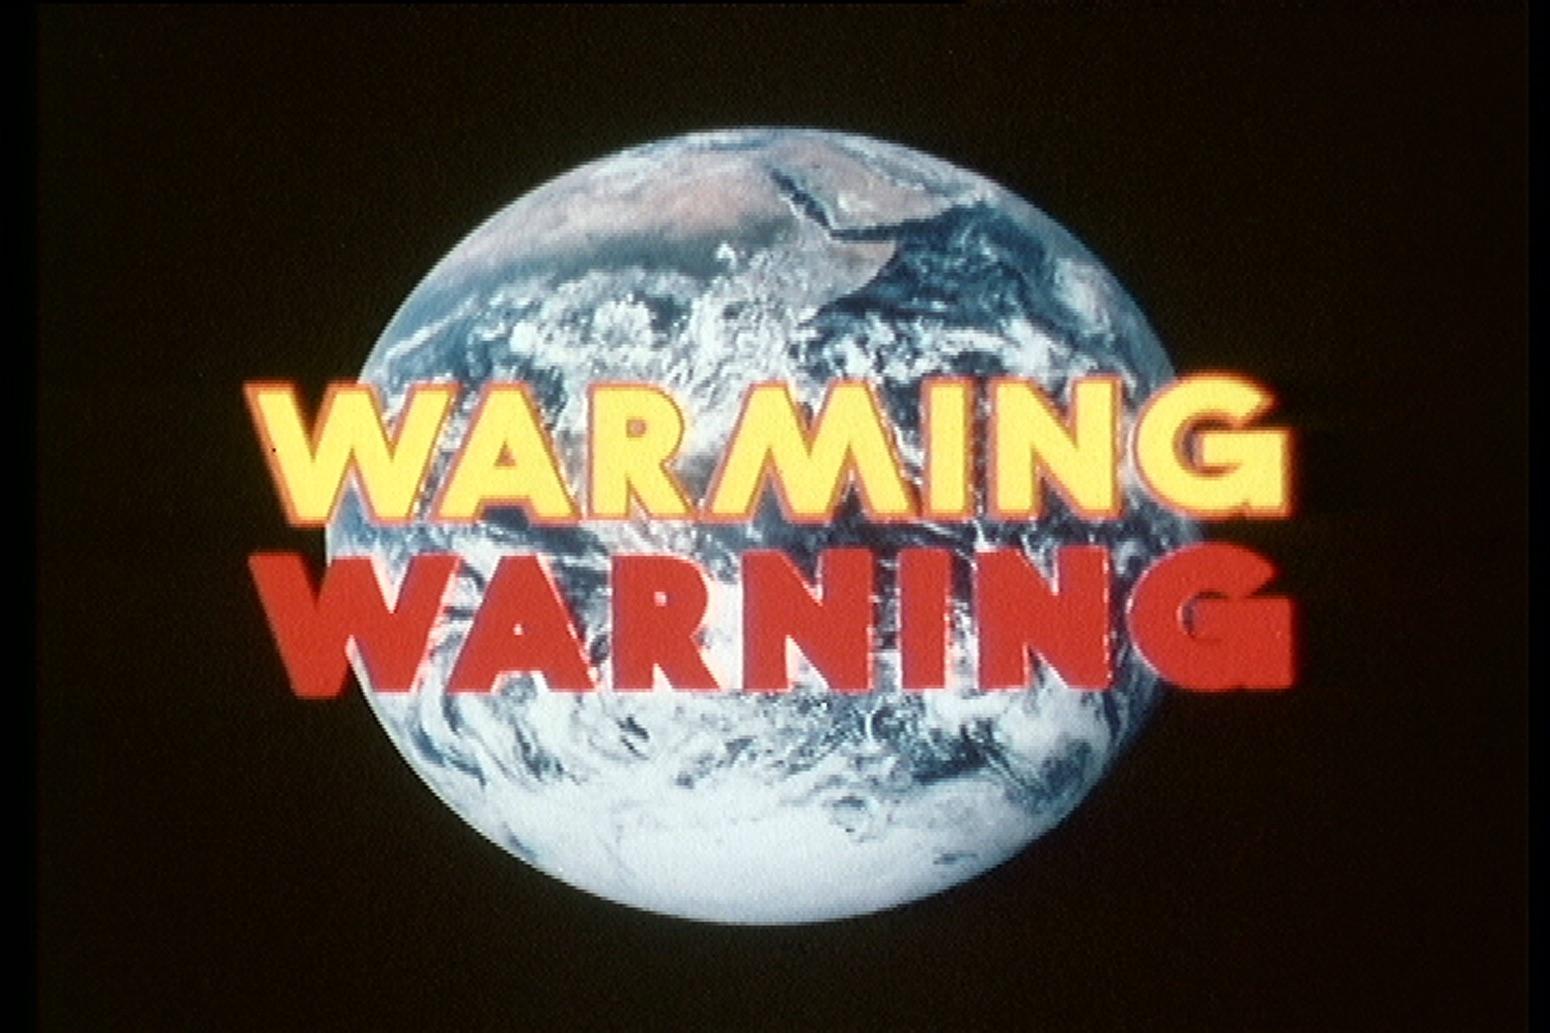 The opening titles of Warming Warning, a 1981 Thames Television documentary, that showed climate change was well understood long before it became a major political issue